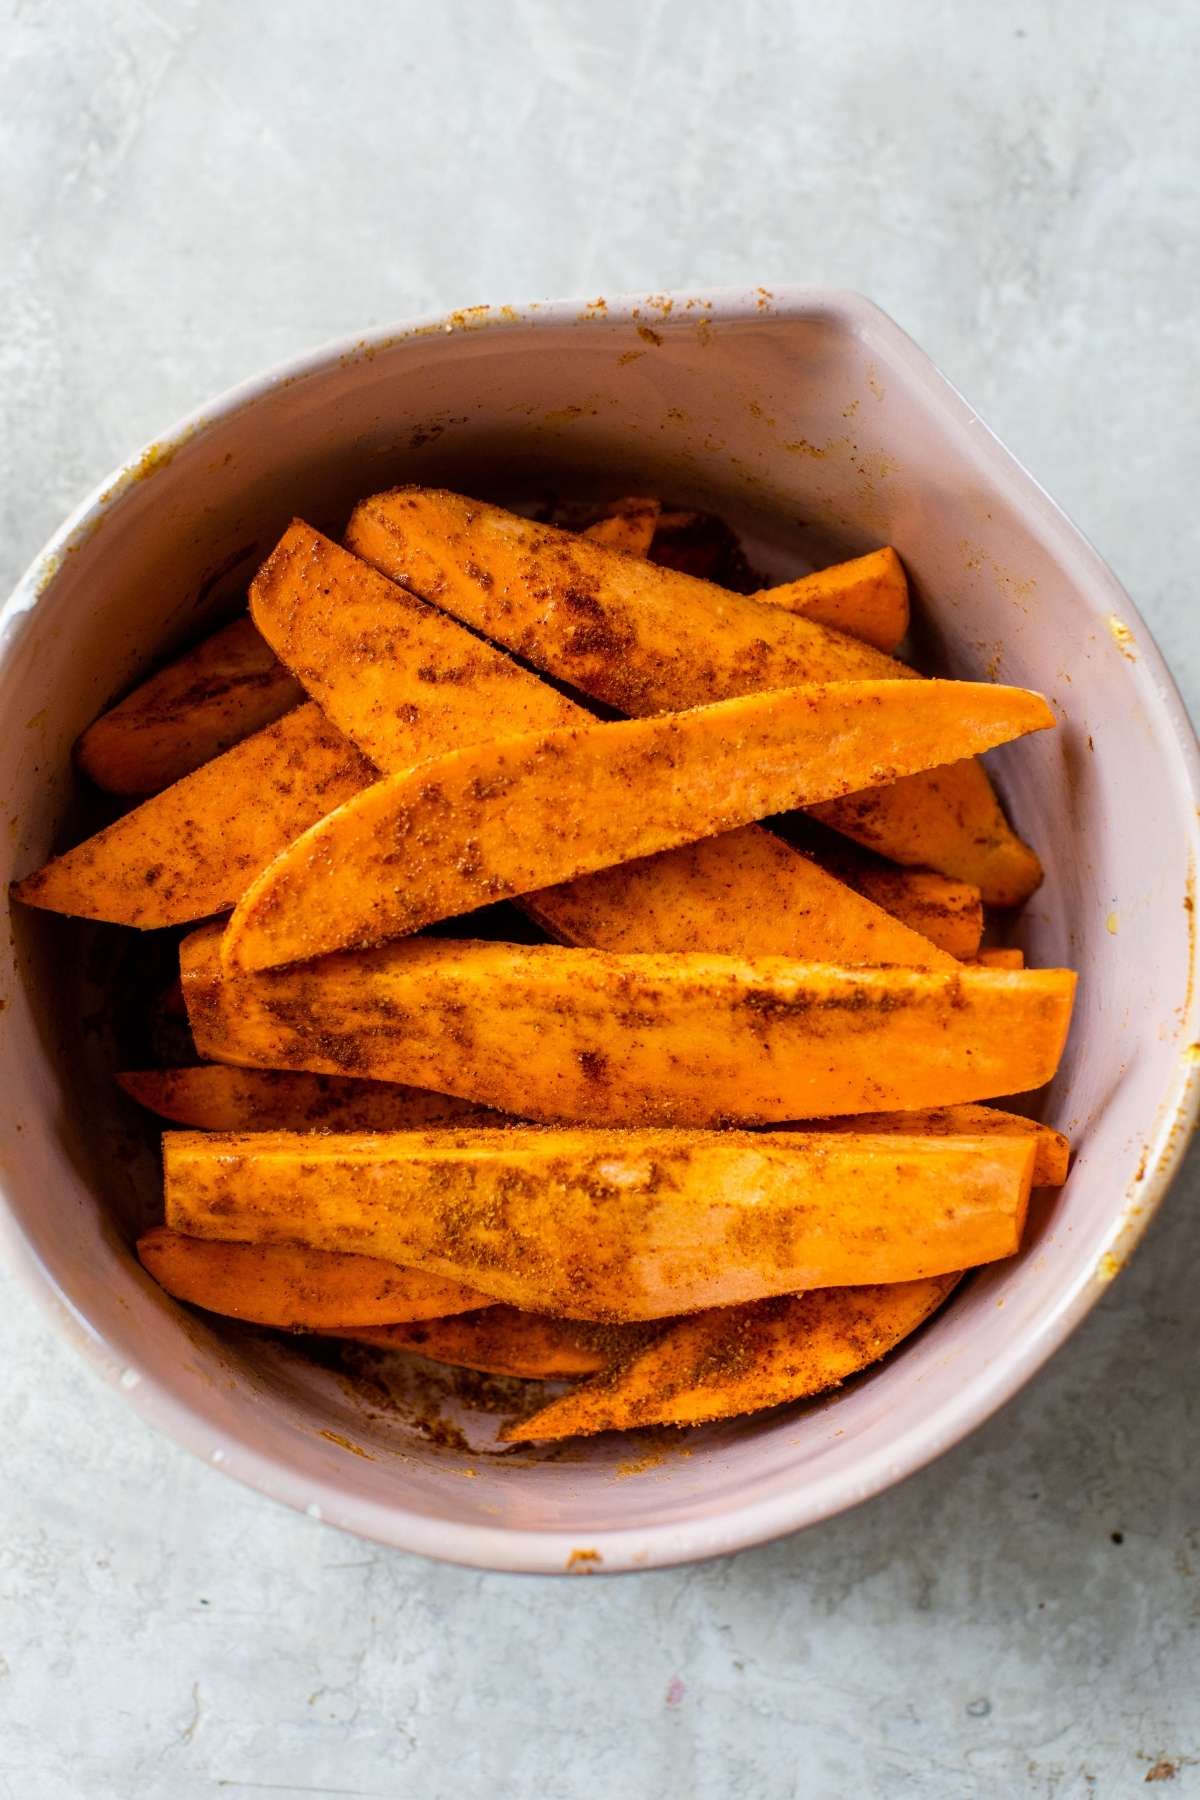 Tossing sweet potato wedges in spices.